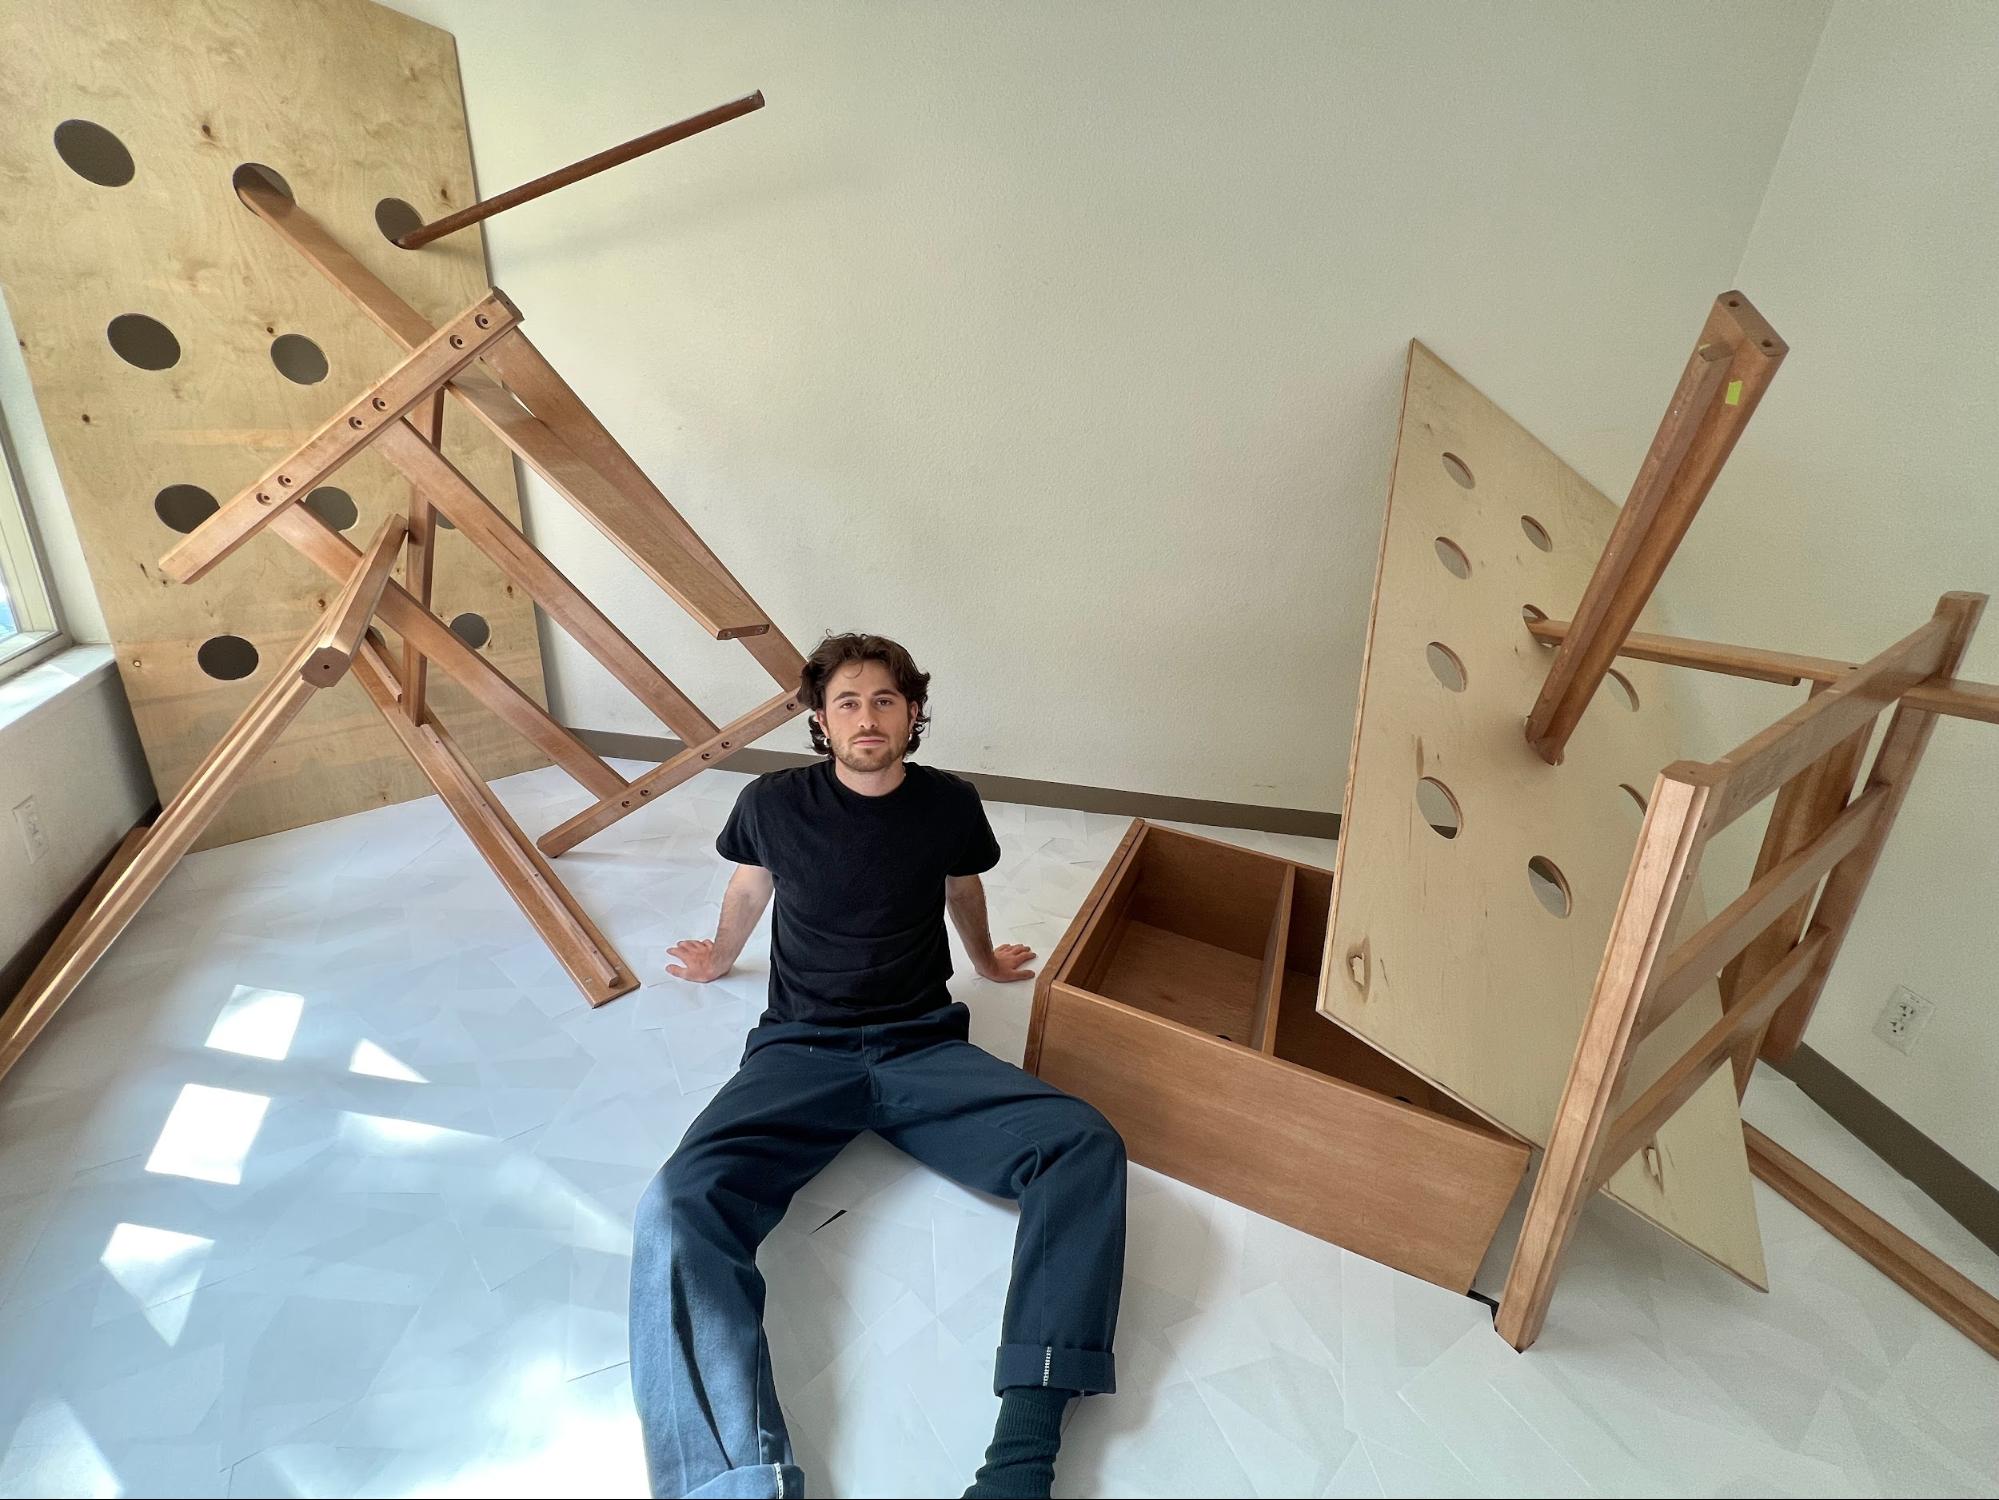 Yonatan Laderman ’23 sits between the reconstructed bed frames that make up his art exhibition, "2: A Monument."